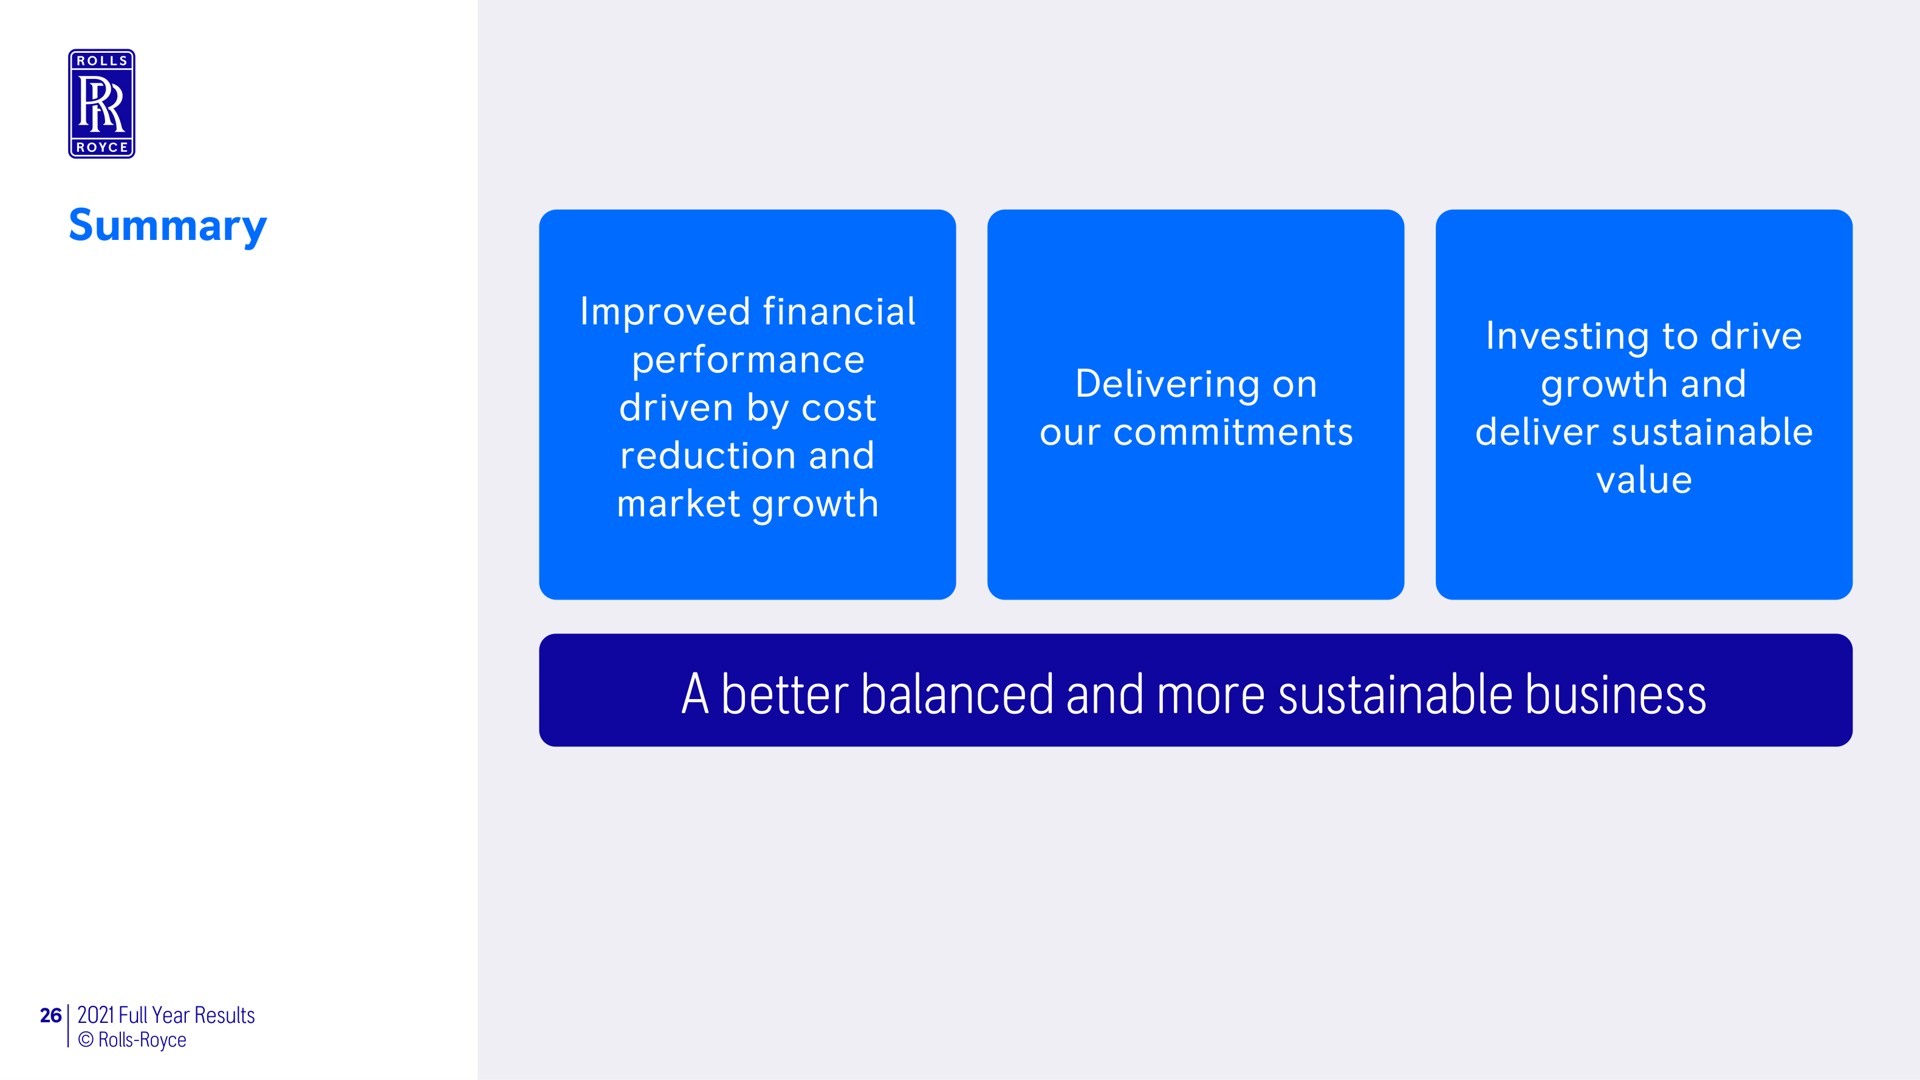 improved financial performance driven by cost reduction and market growth delivering on our commitments investing to drive growth and deliver sustainable value a better balanced and more sustainable business summary | Rolls-Royce Holdings